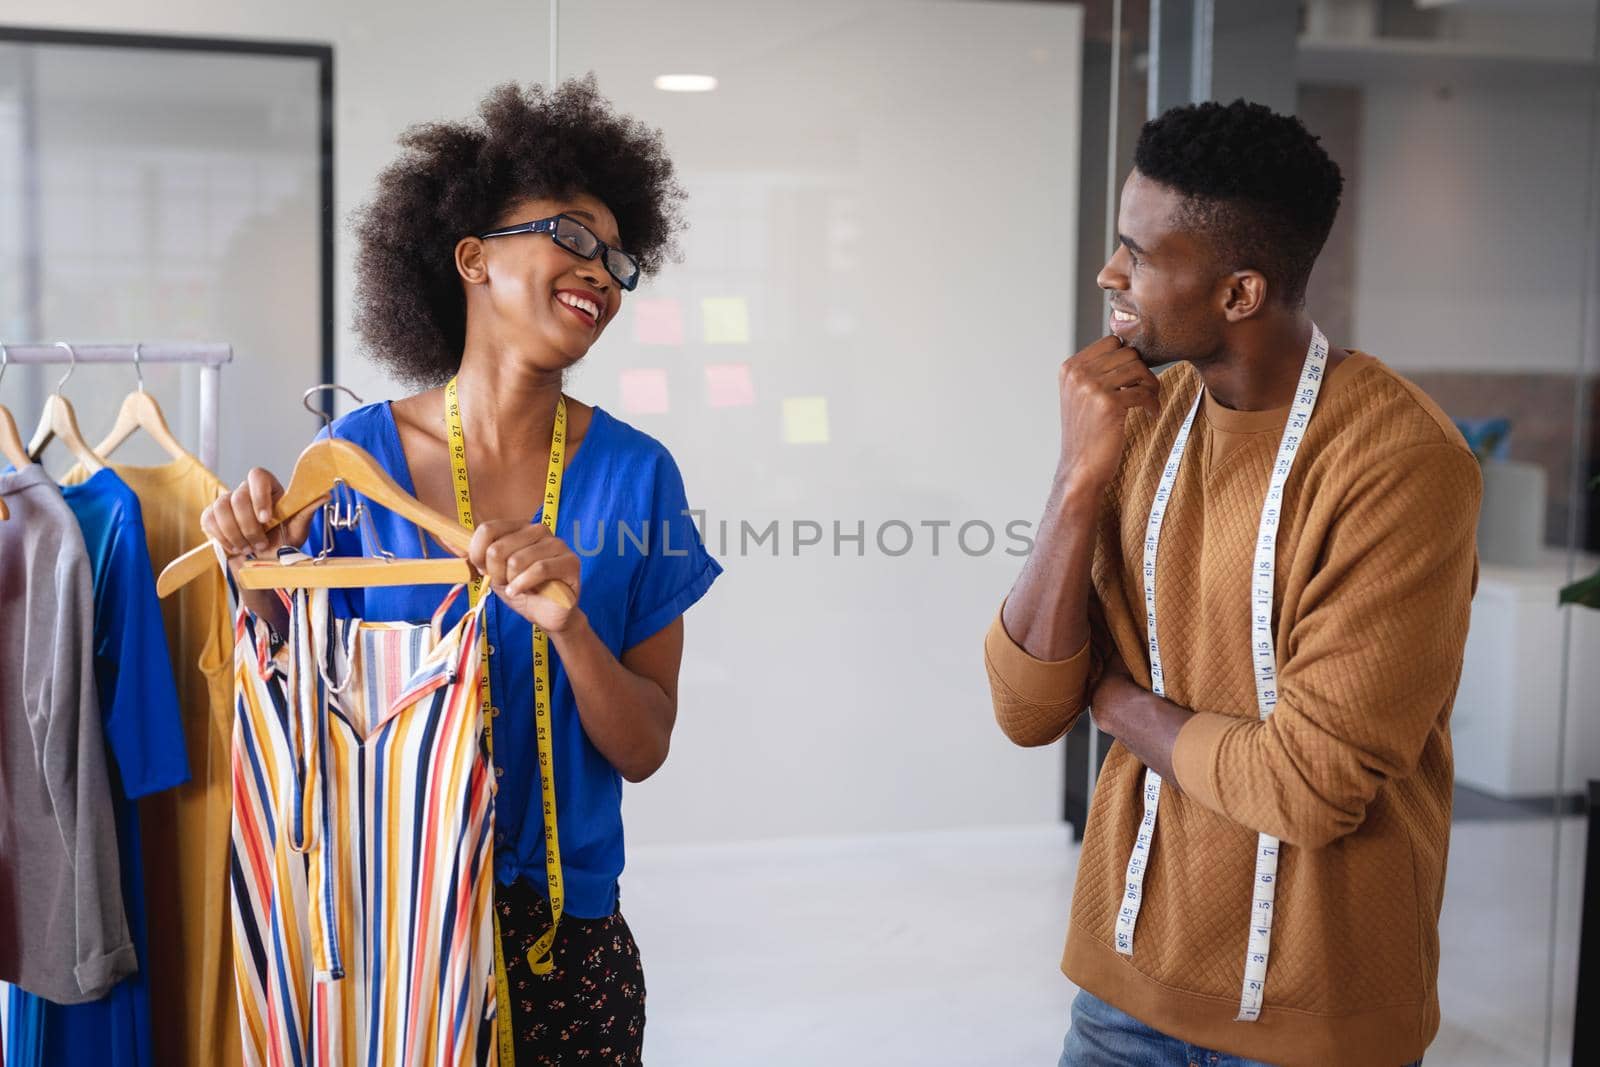 Diverse male and female fashion designers at work discussing and looking at clothes by Wavebreakmedia